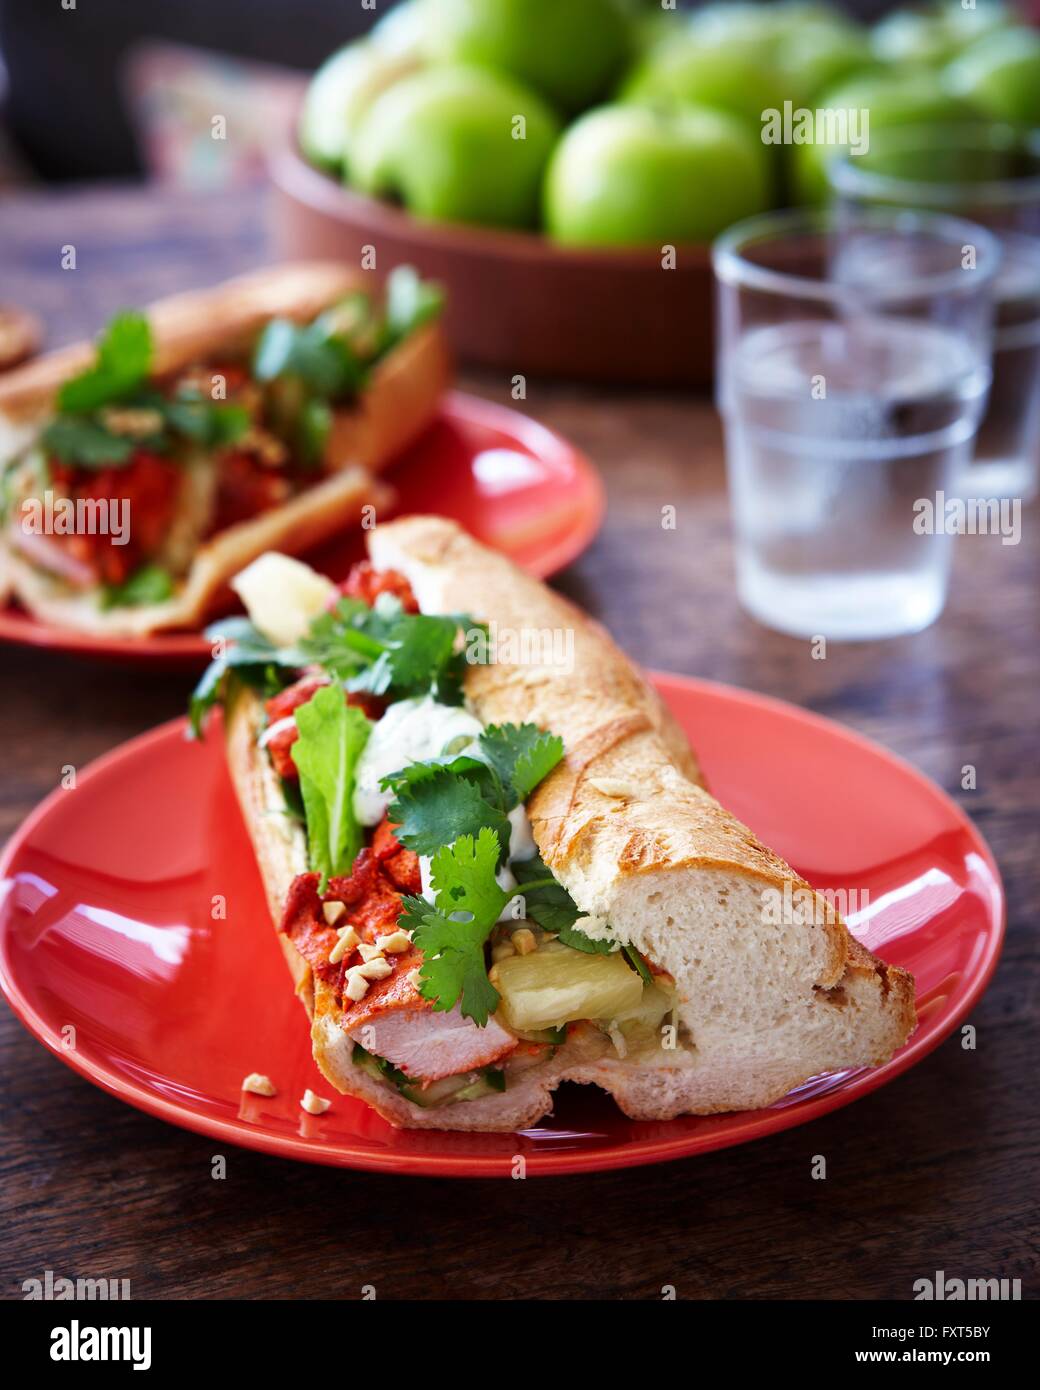 Plates of tandoori chicken baguettes on wooden table Stock Photo